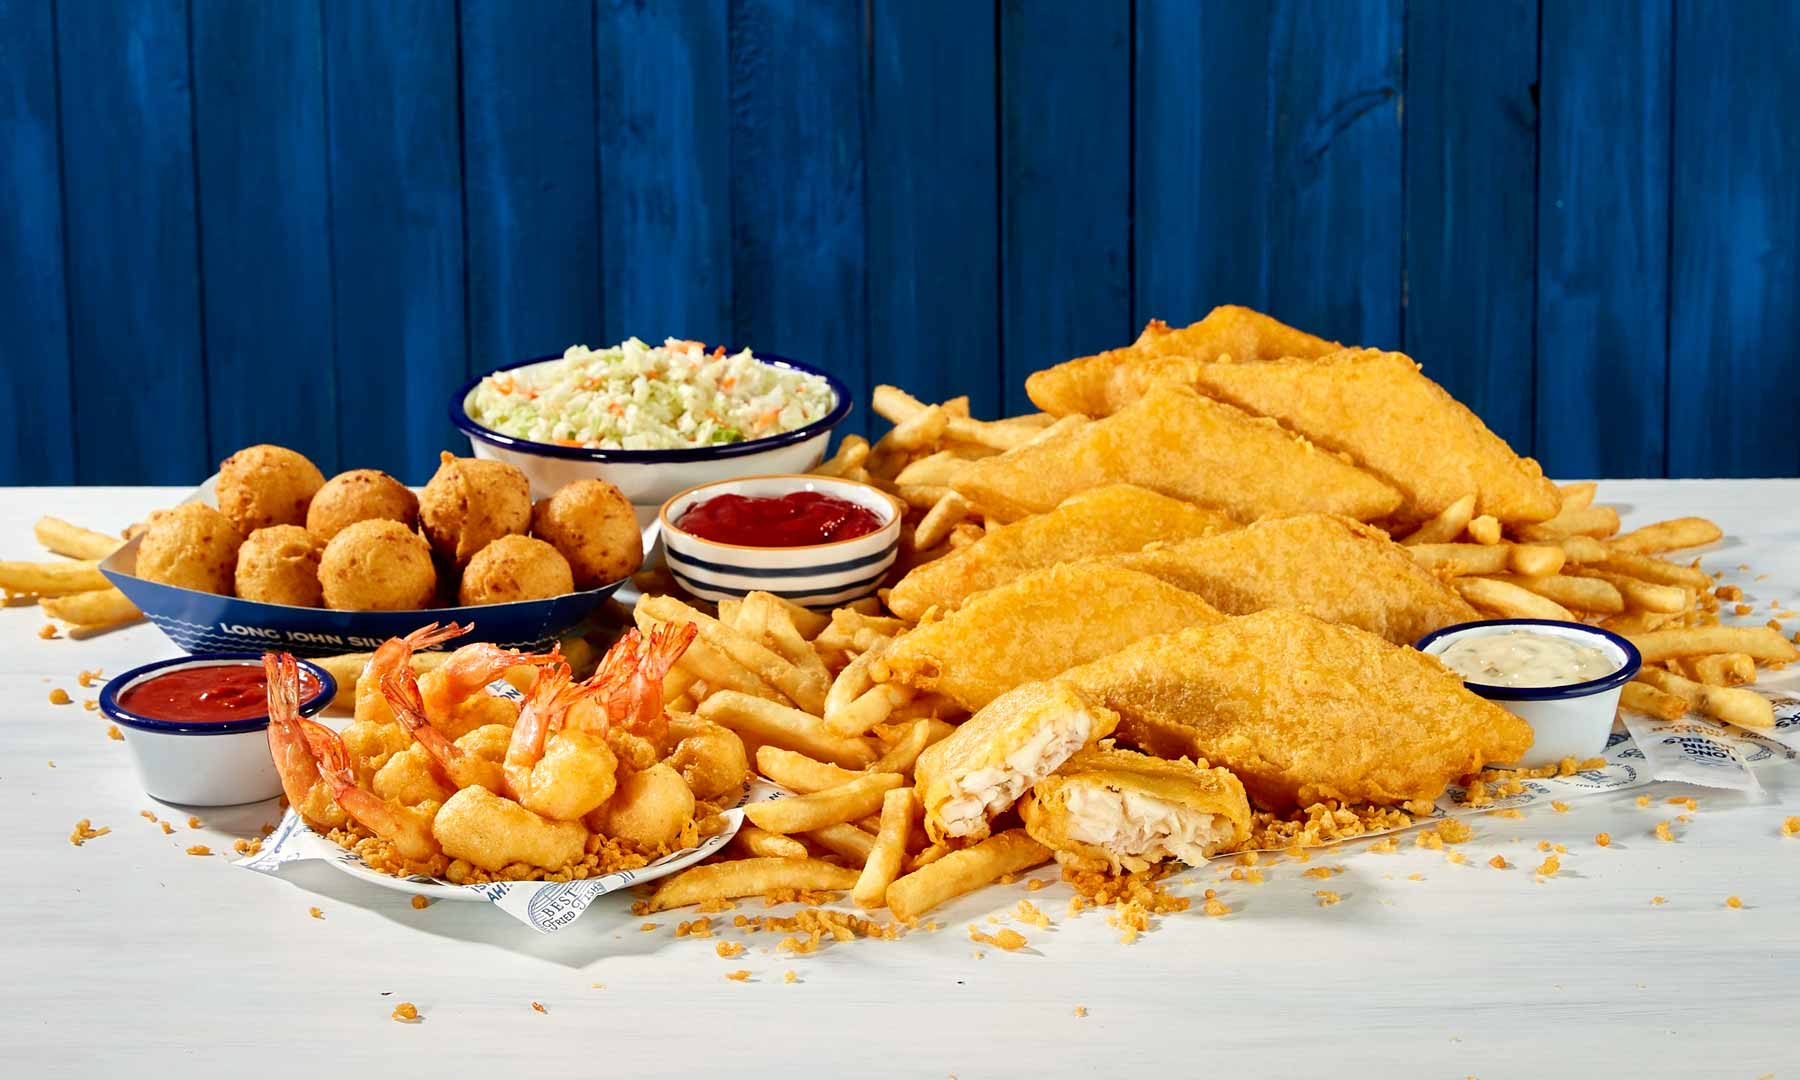 Long John Silver's Plate Of Fish For A Family